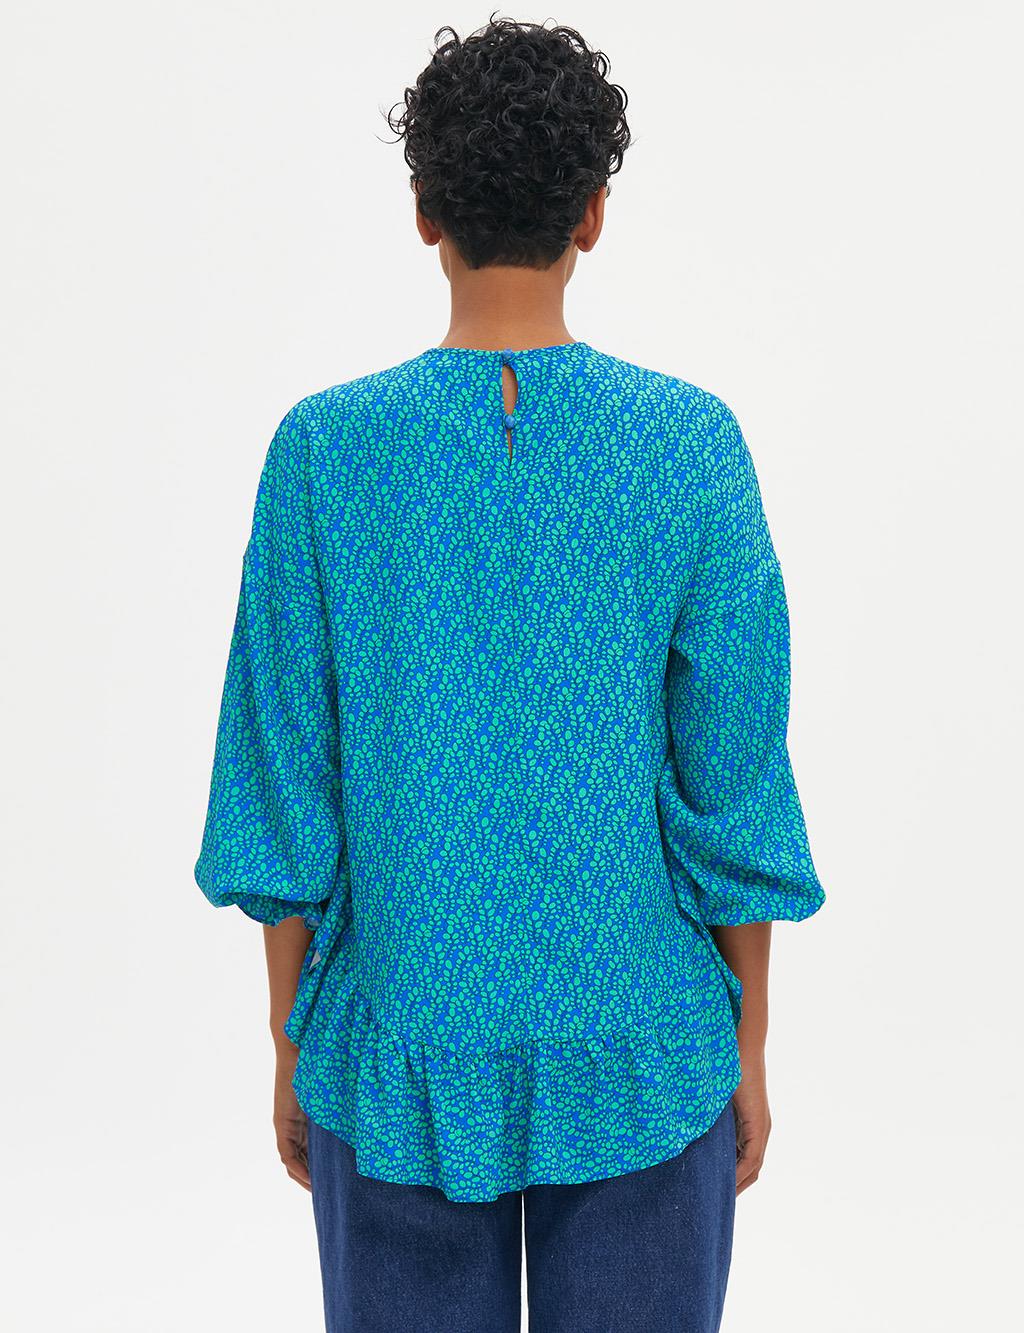 Ruffle Printed Blouse Turquoise